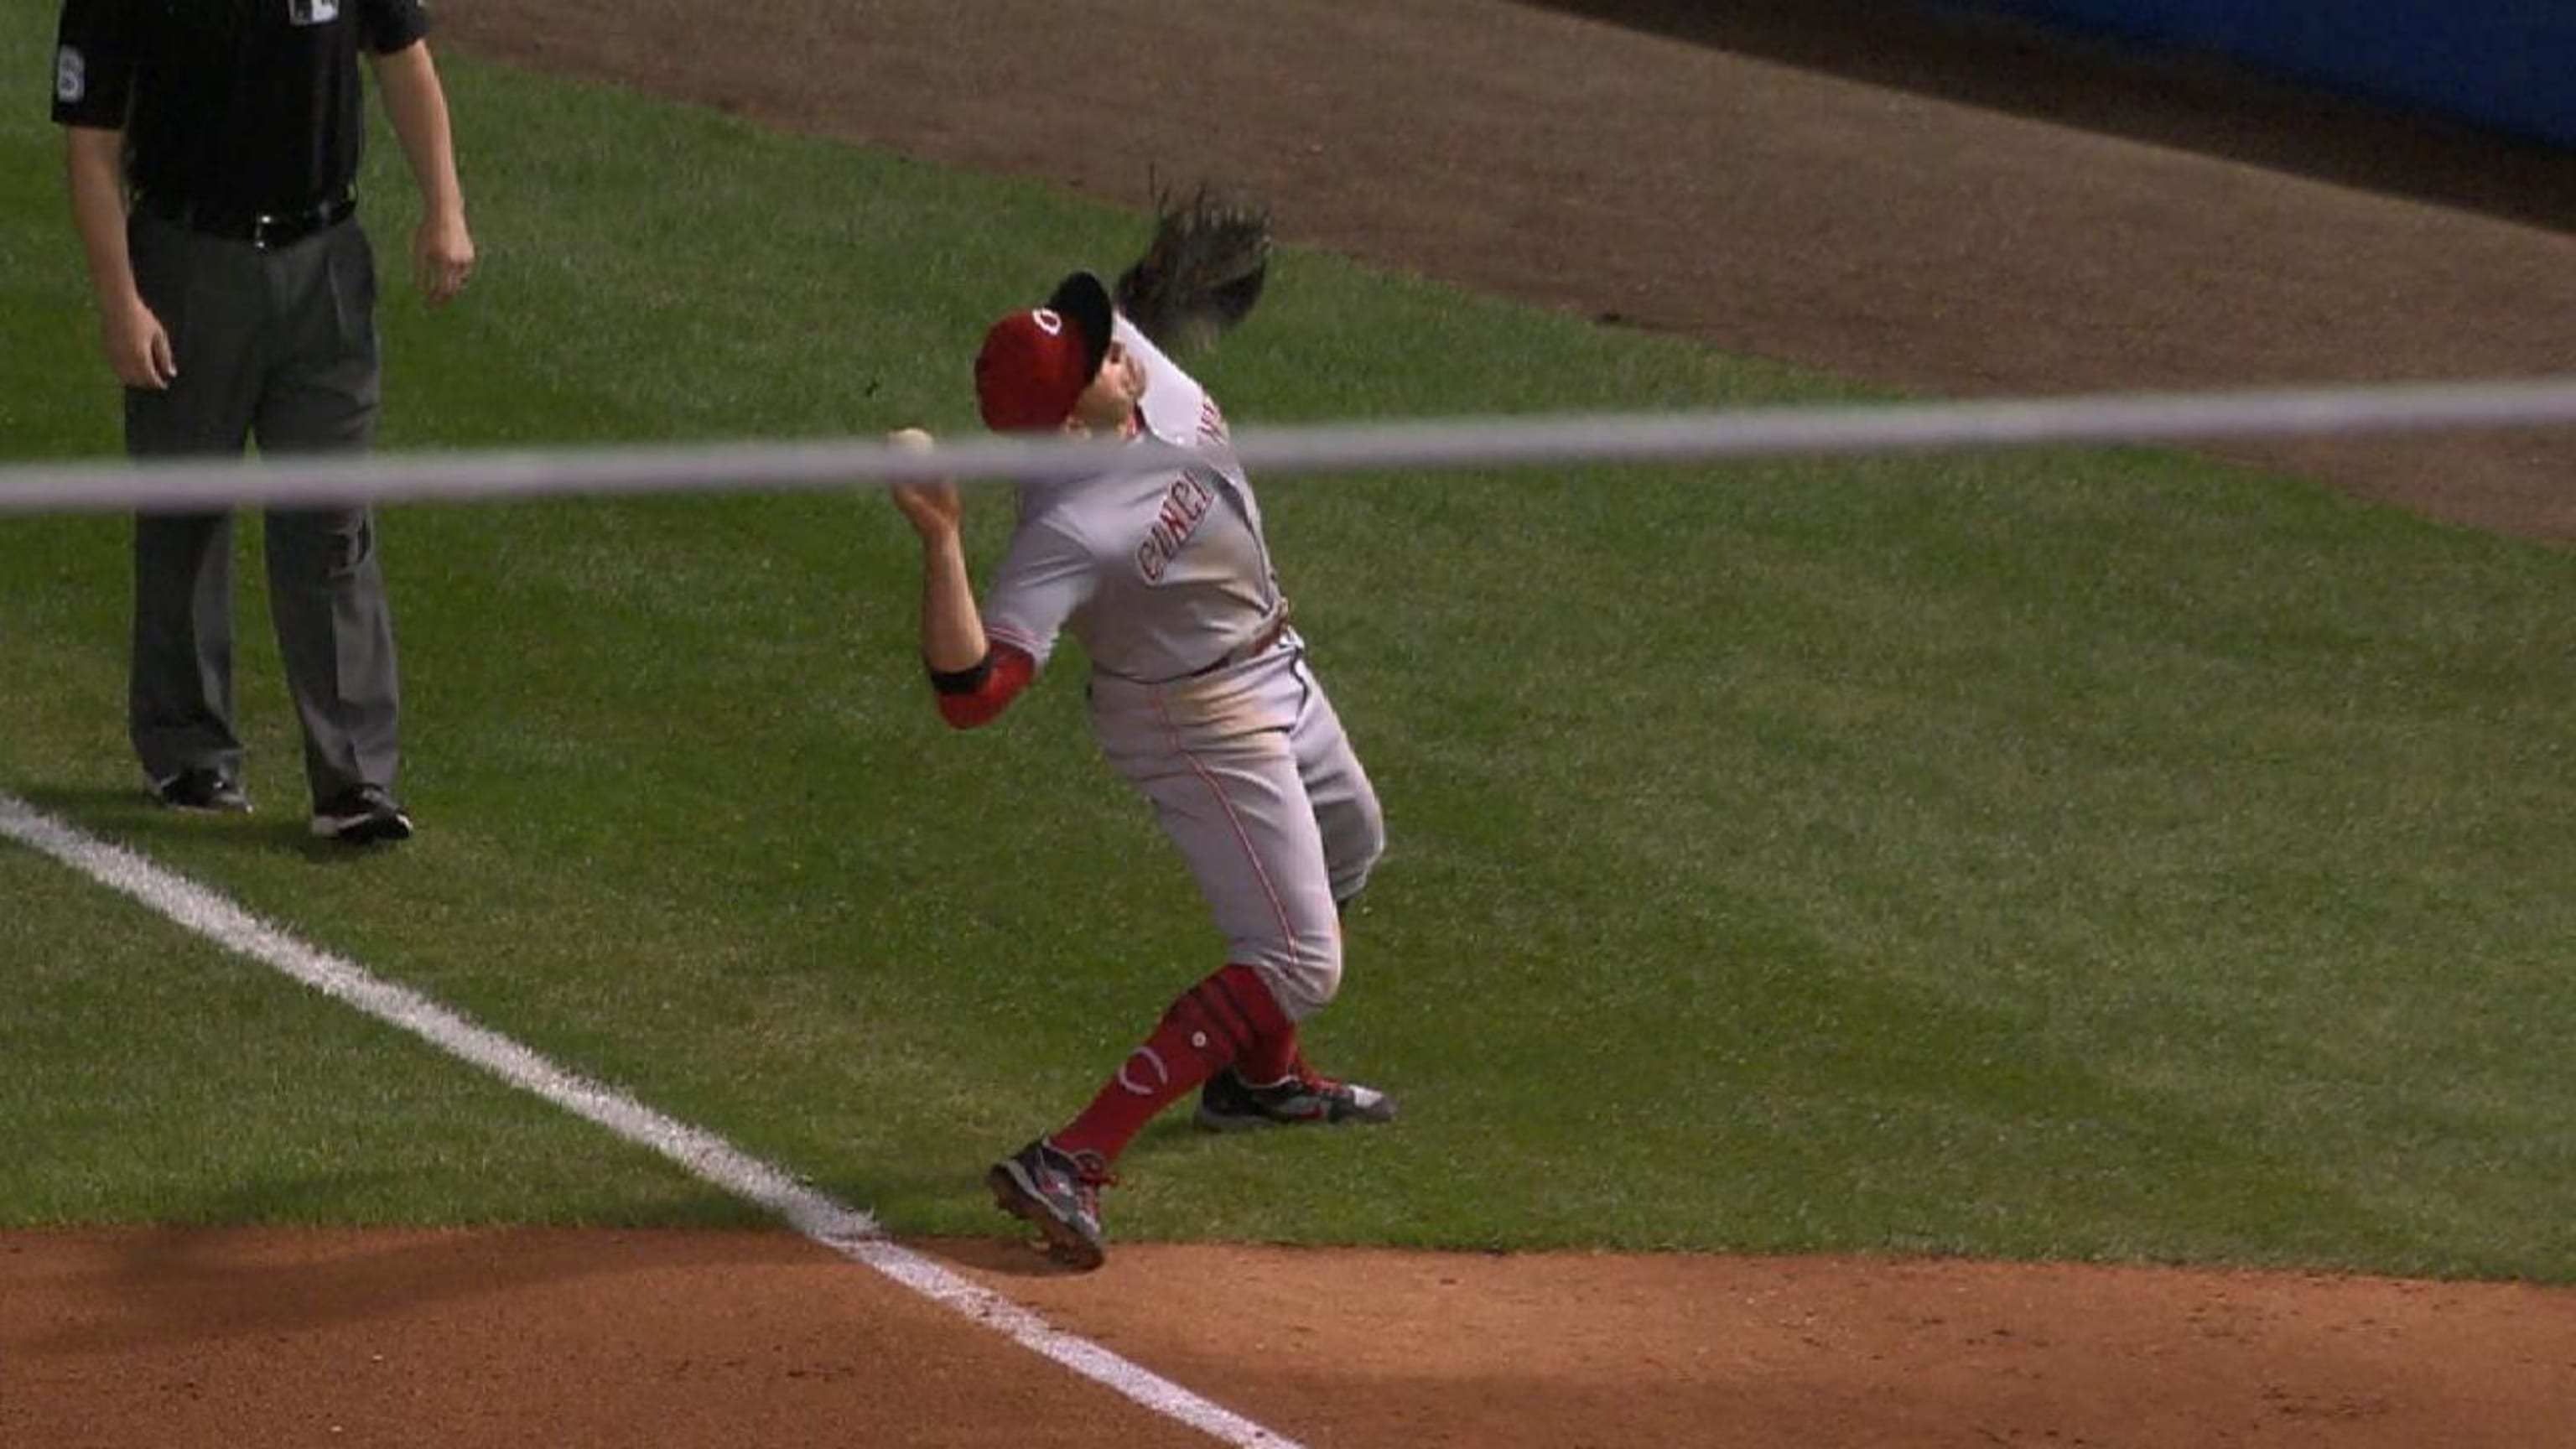 Right before hitting a grand slam, Joey Votto attempted to shoo a bird away  that was interrupting the game